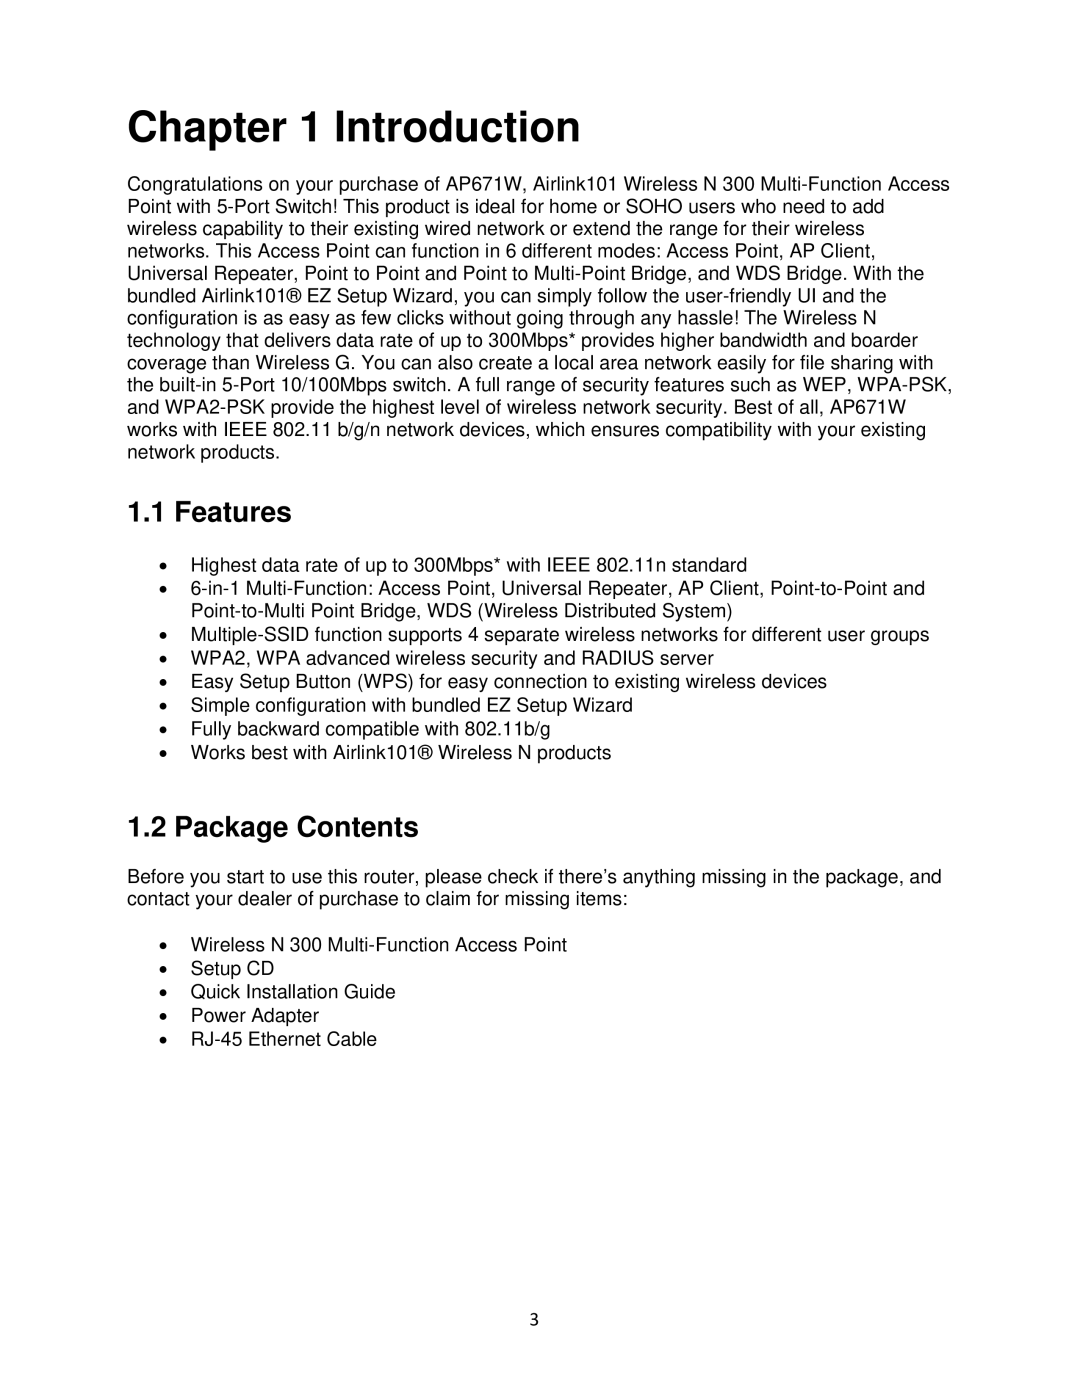 Airlink101 N300 user manual Features, Package Contents 